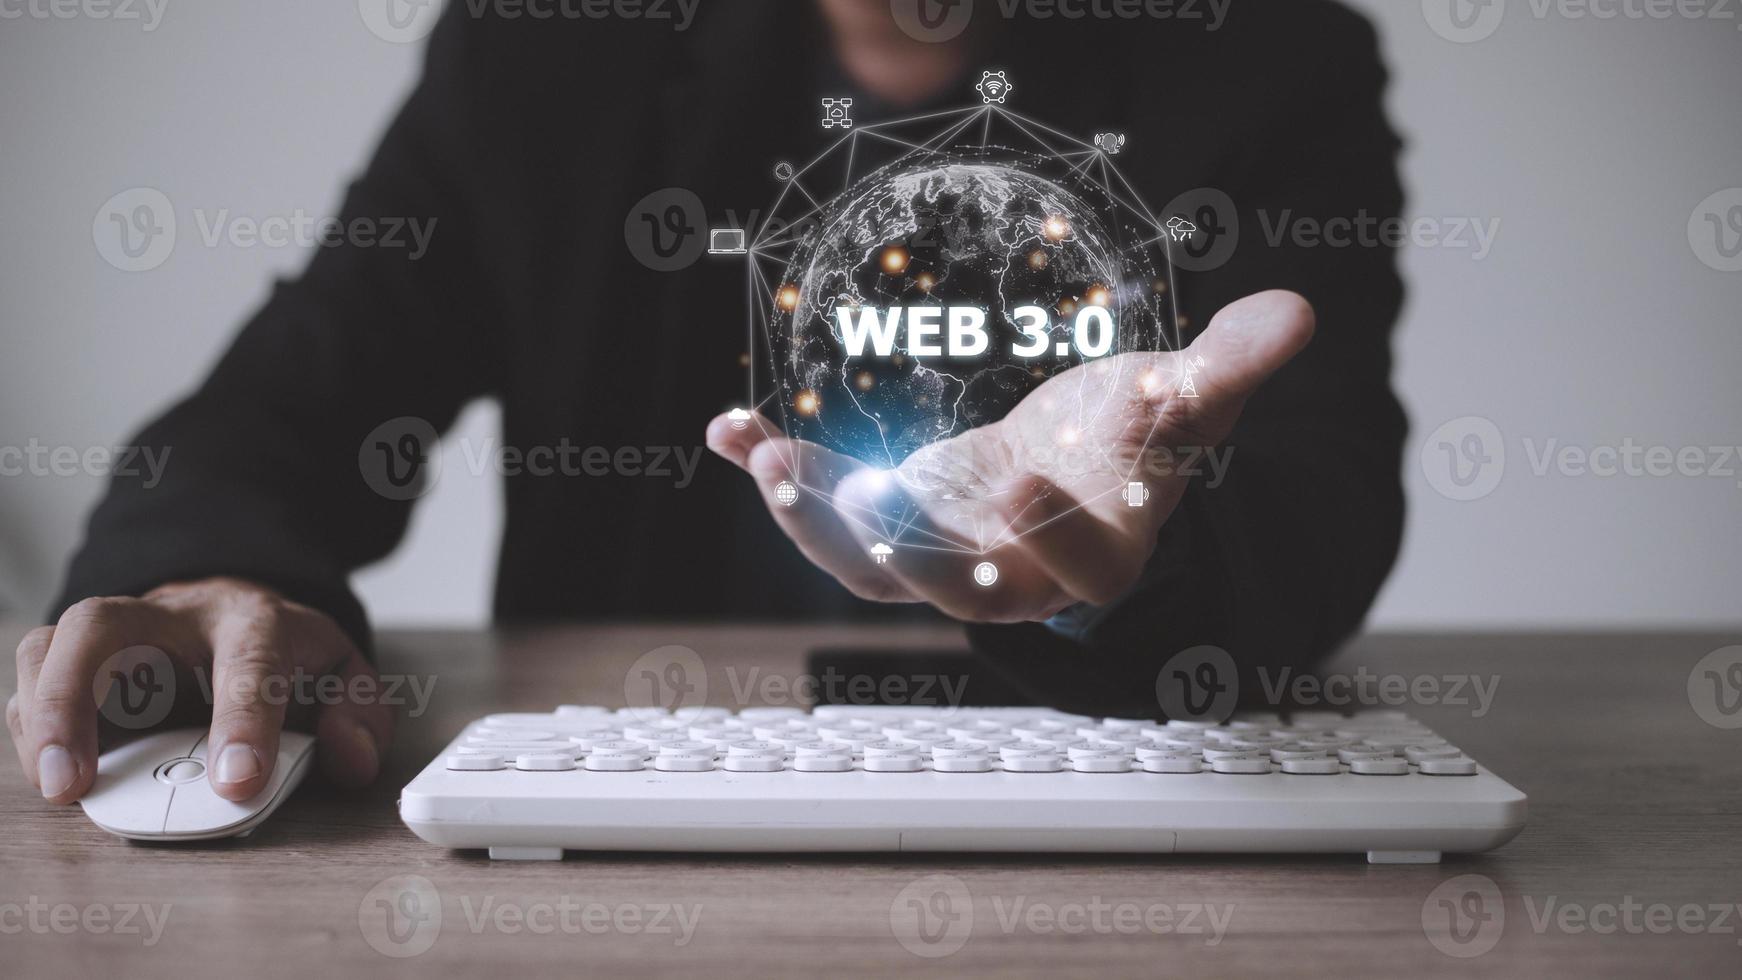 Web 3.0 concept image with a man using a laptop. Technology and WEB 3.0 concept. photo